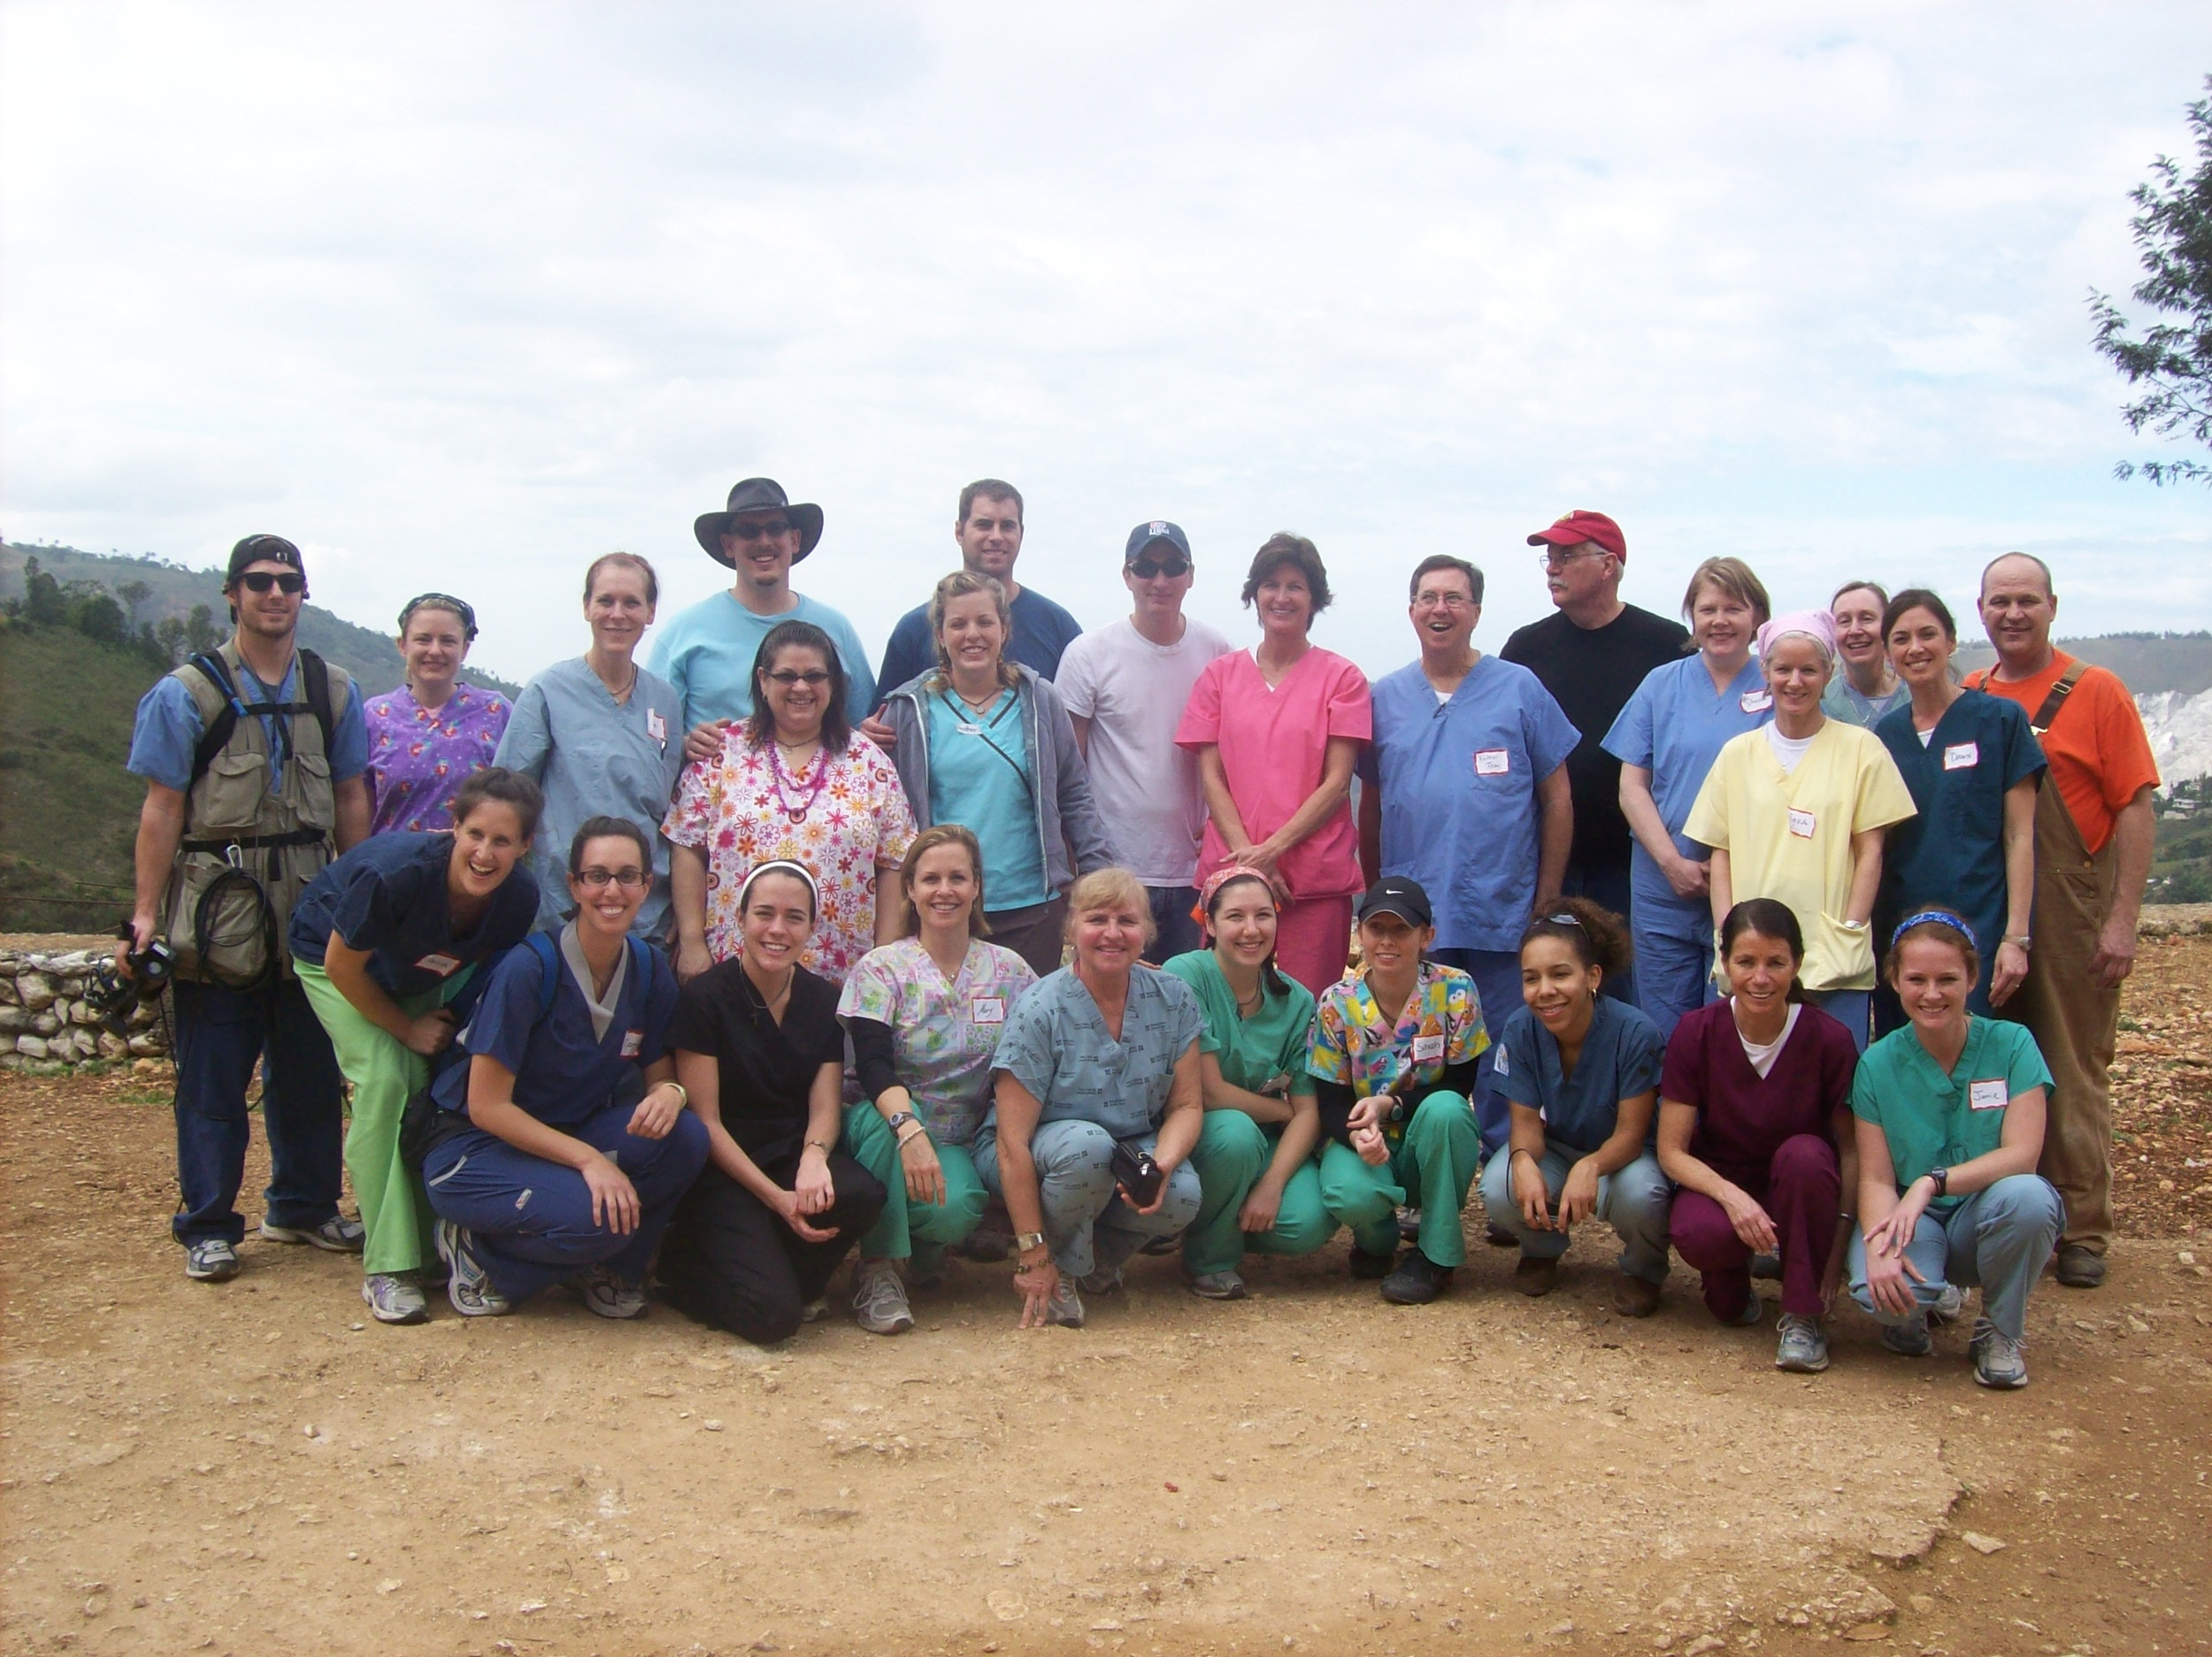 Filmmakers Ryan Atenhan and Mercedes Kane (far left) pose with the Little by Little medical team in Gramothe, Haiti.